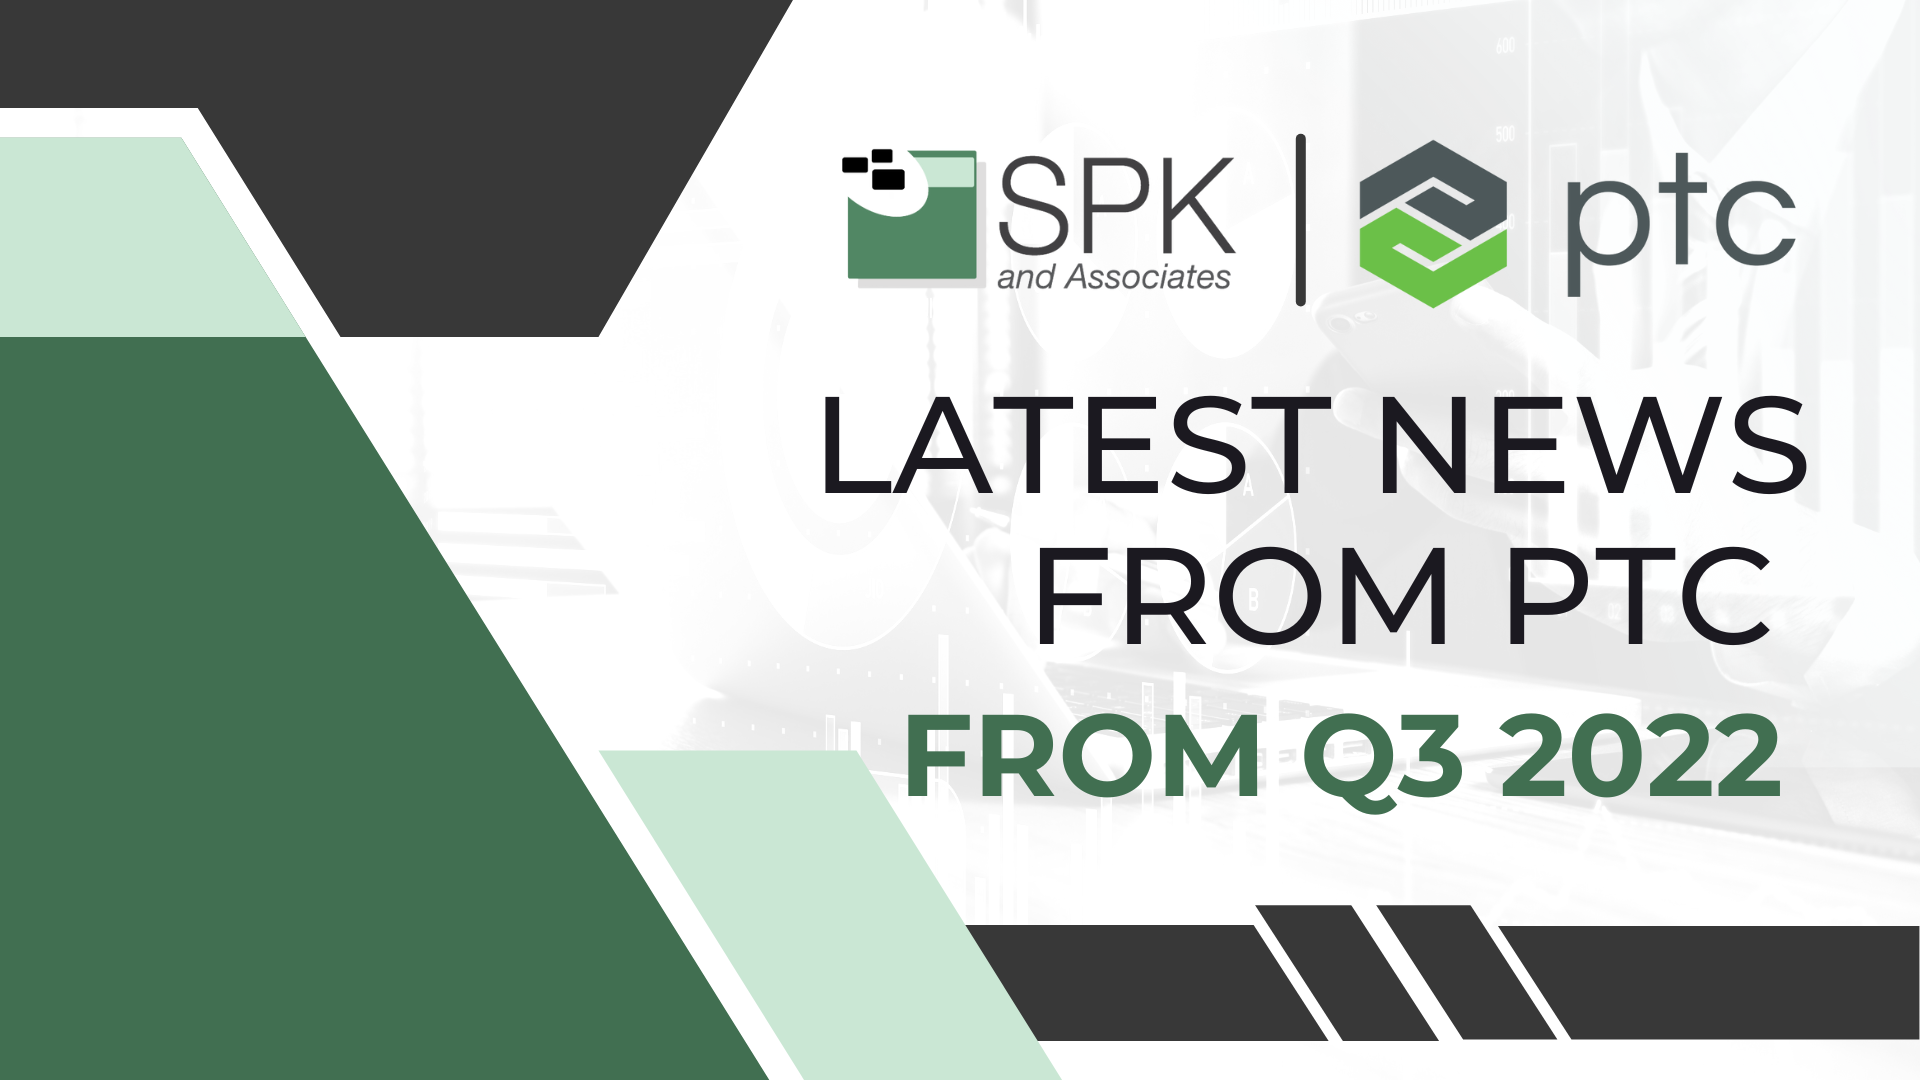 Latest News From PTC From Q3 2022 featured image